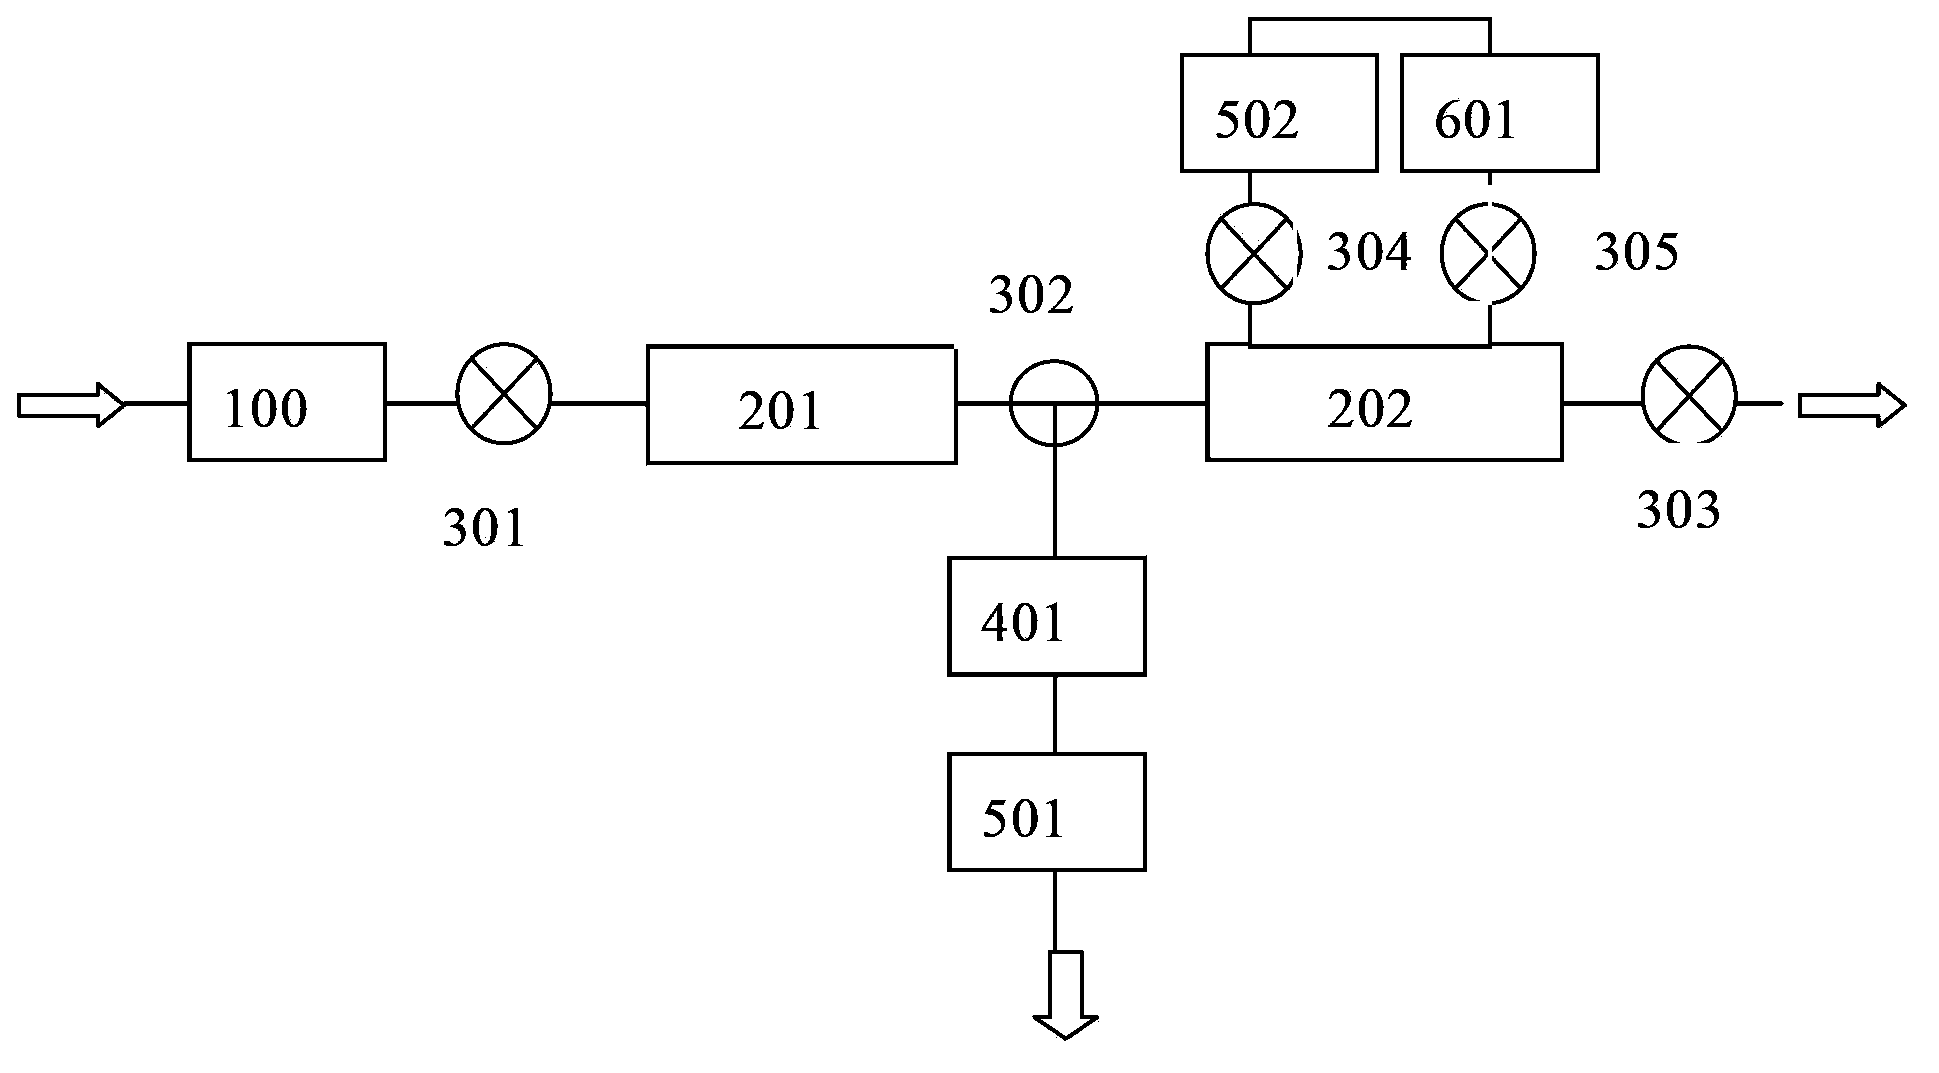 Self-calibration exhaled gas analysis device